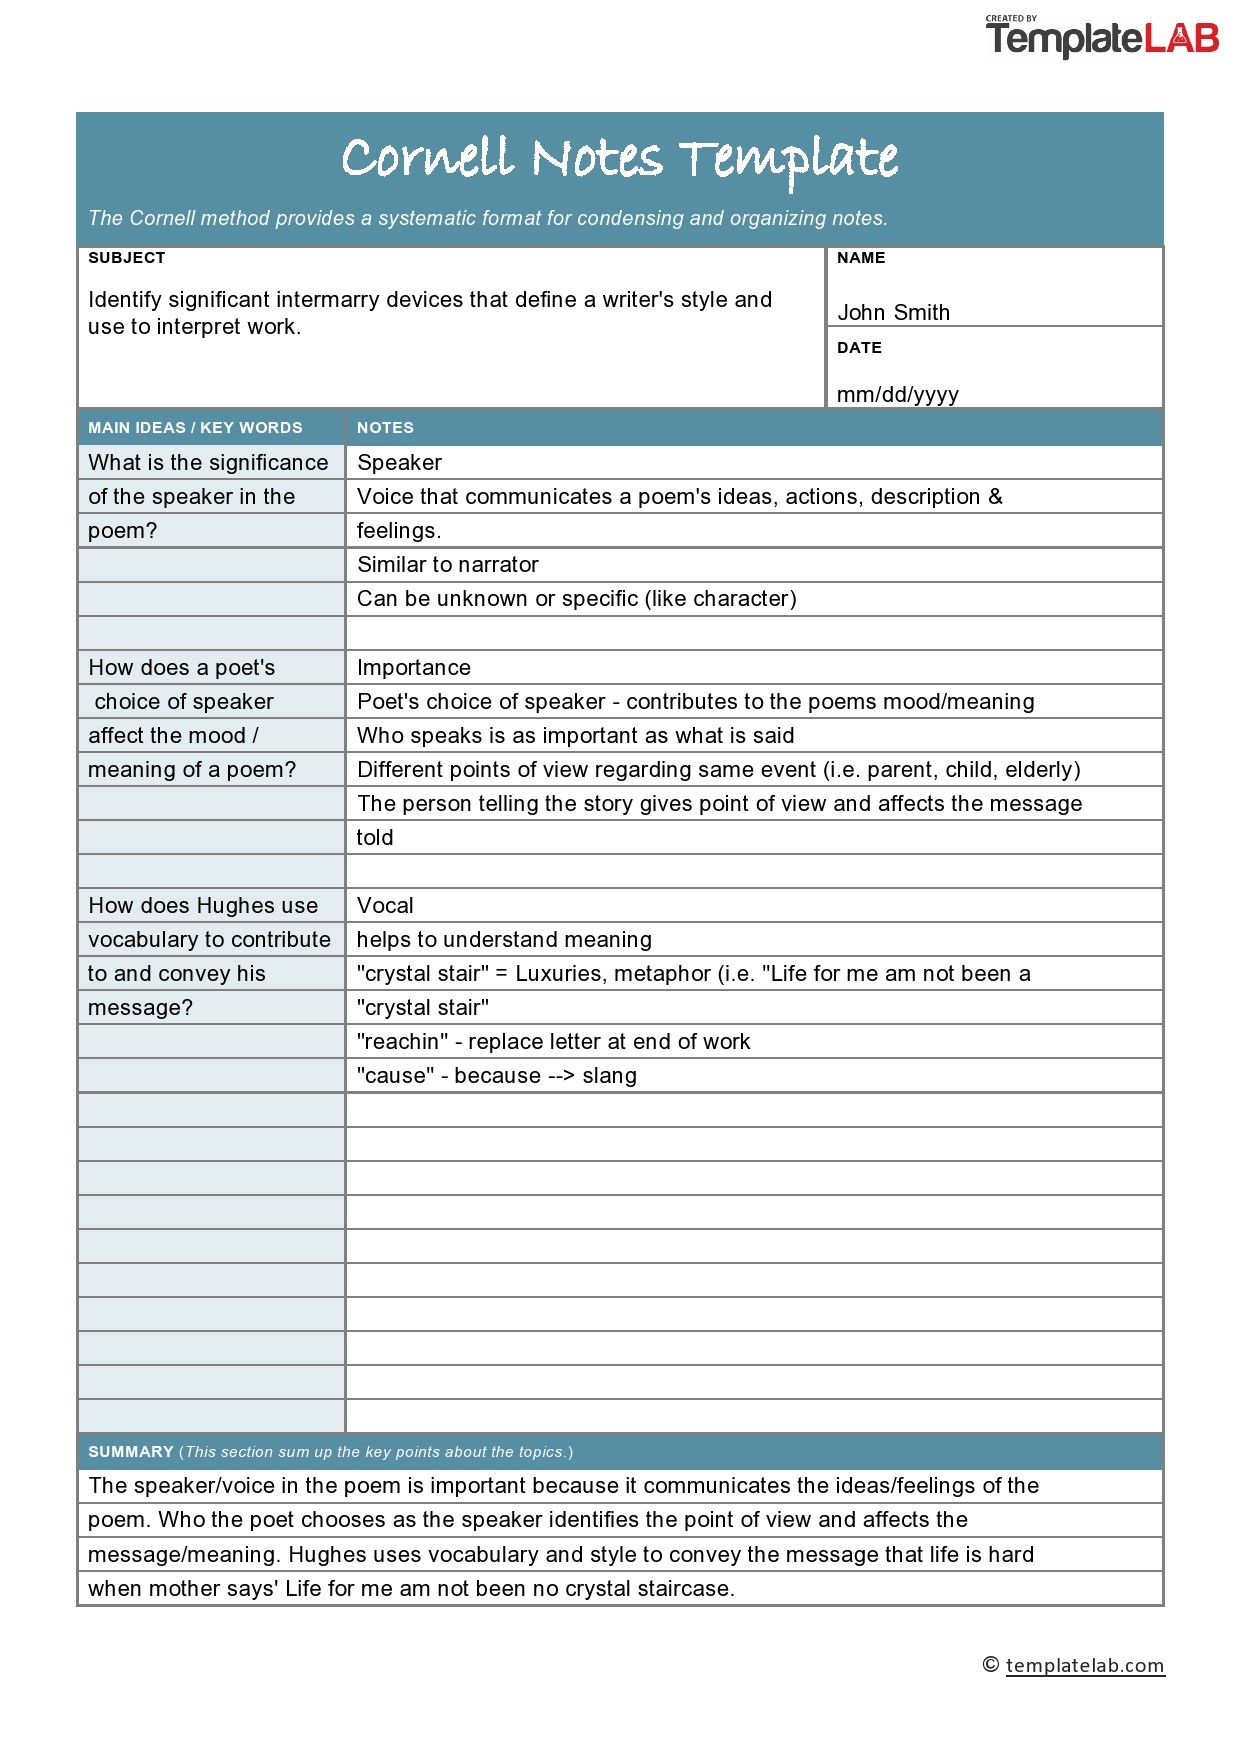 Free Cornell Notes Template 1 - TemplateLab